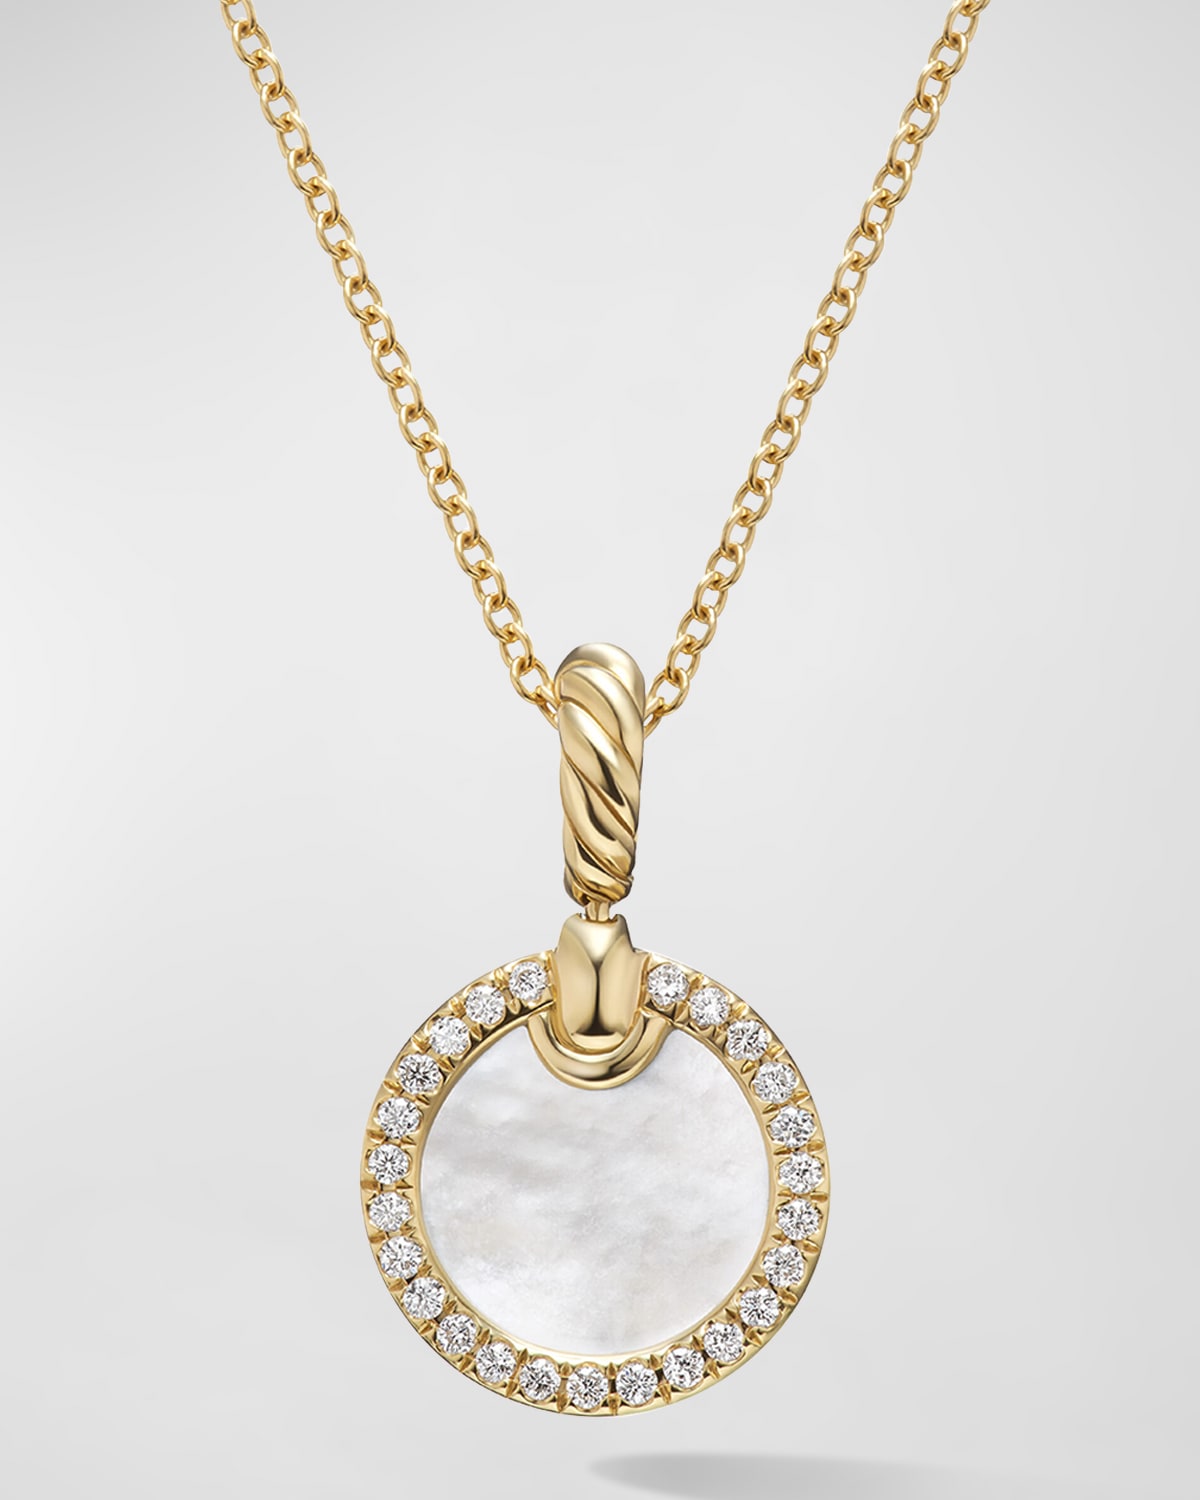 David Yurman Dy Elements Pendant Necklace With Gemstone And Diamonds In 18k Gold, 17.8mm, 16-18"l In Mother Of Pearl